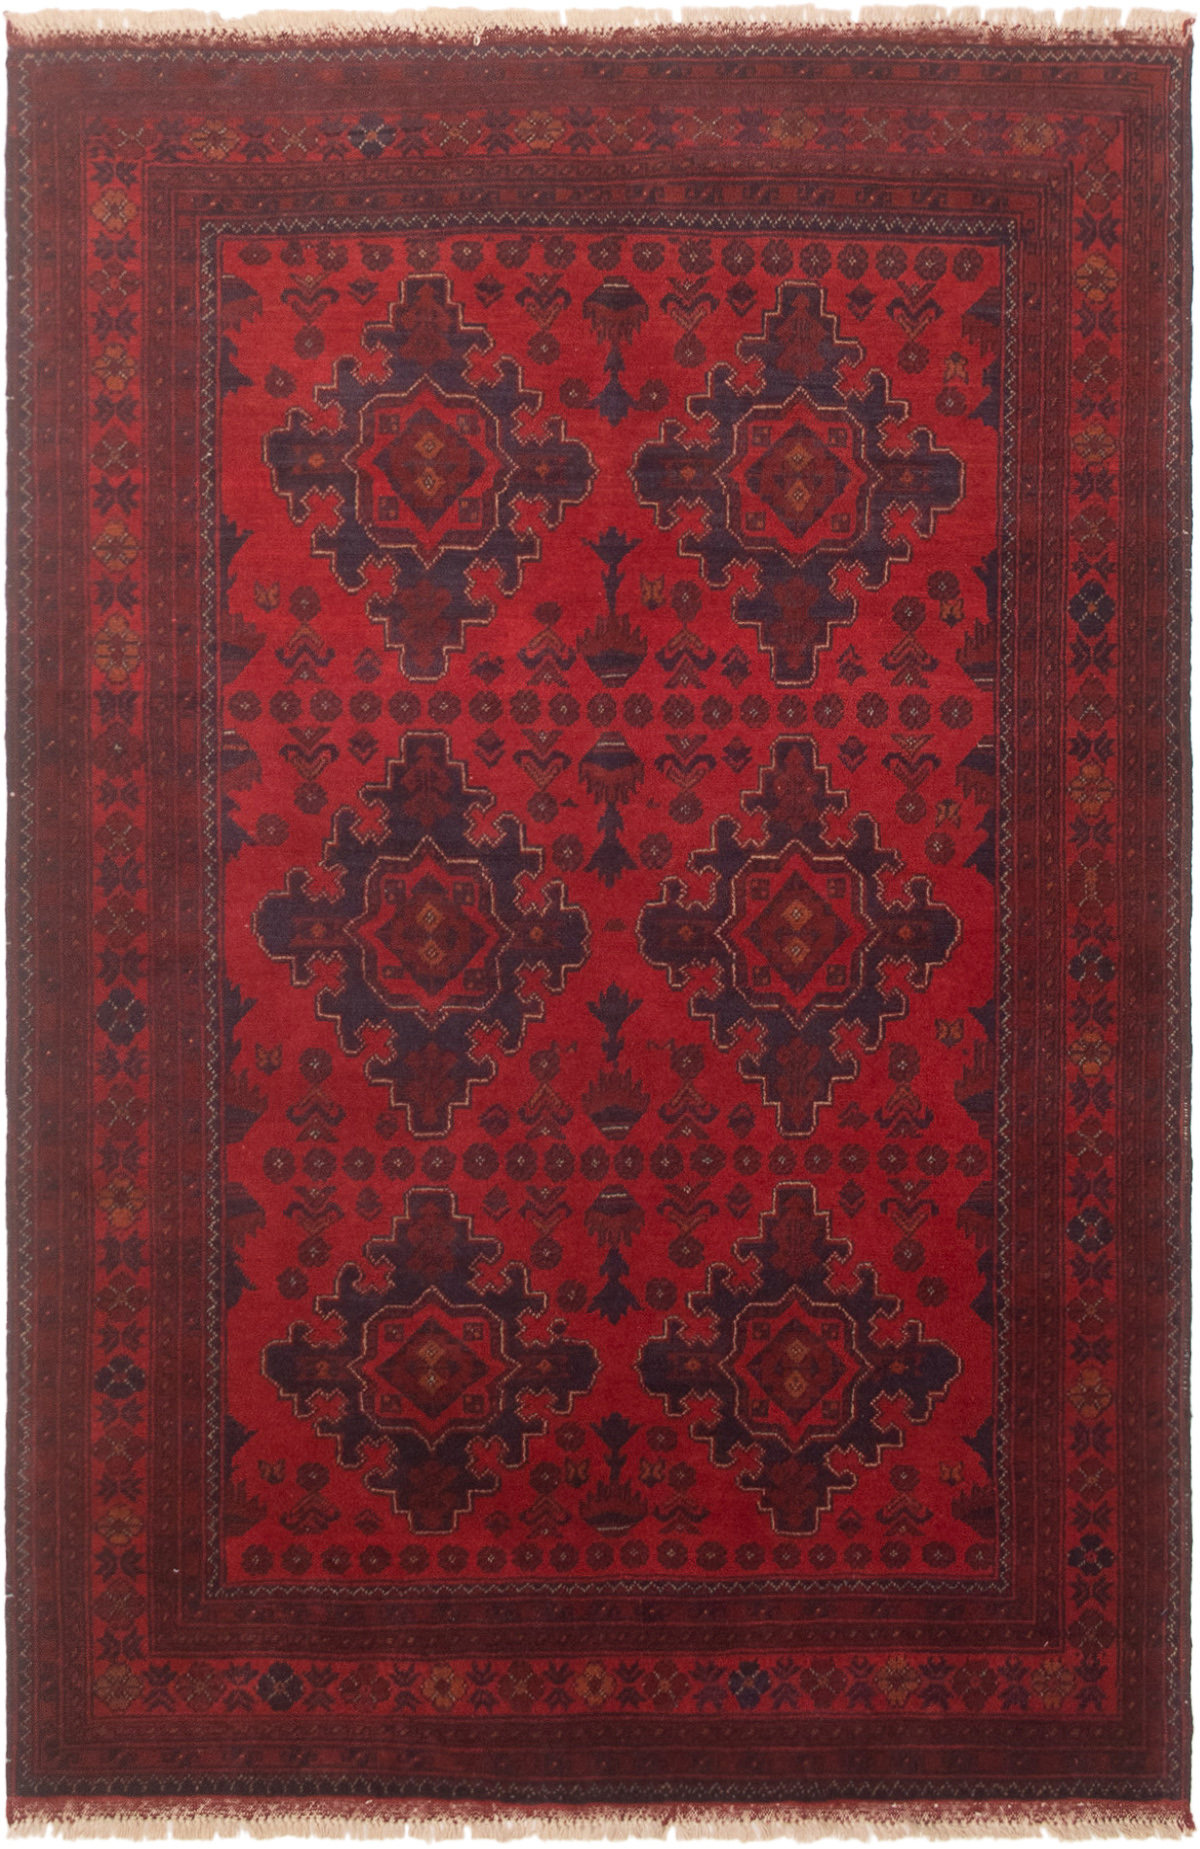 Hand-knotted Finest Khal Mohammadi Red Wool Rug 4'0" x 6'2"  Size: 4'0" x 6'2"  